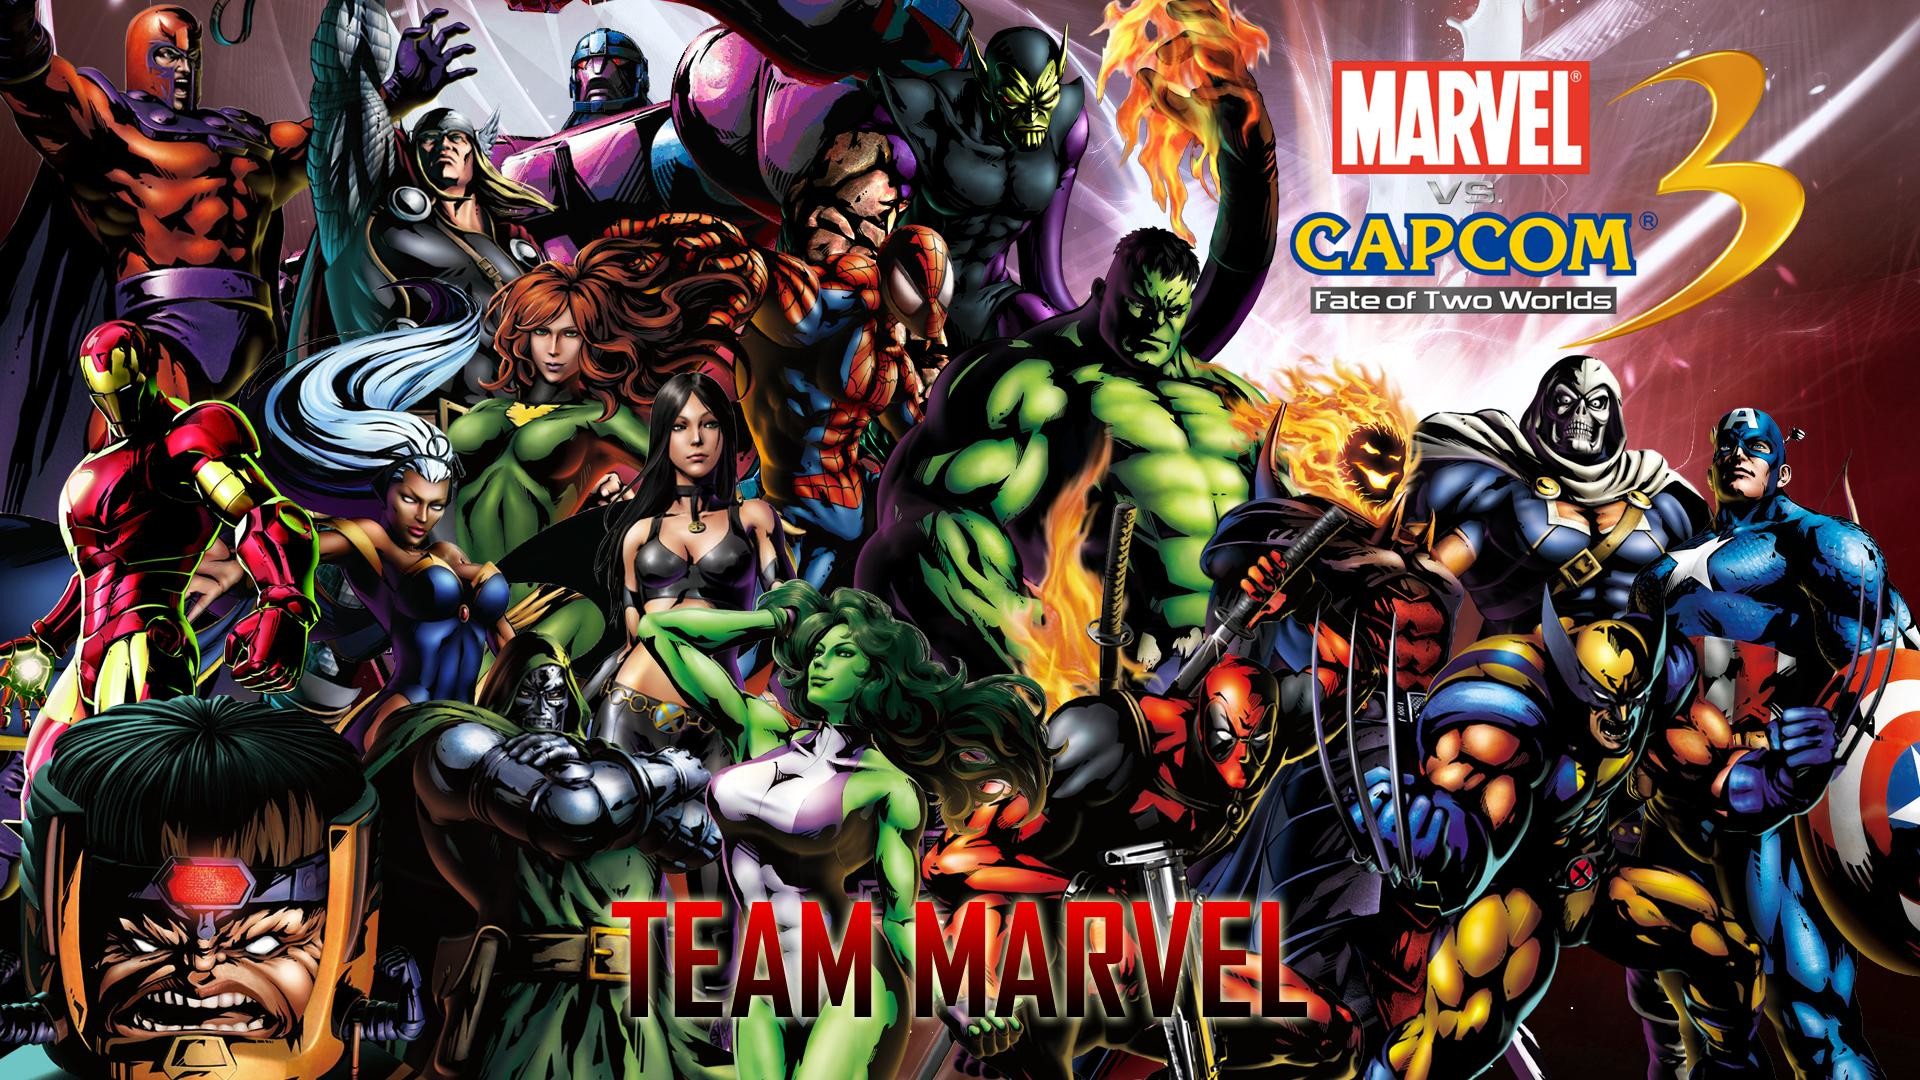 1920x1080 Capcom 3 wallpaper hd | Gaming Wallpapers HD Only | Pinterest | Ultimate  marvel, Marvel vs and Naruto shippuden hd